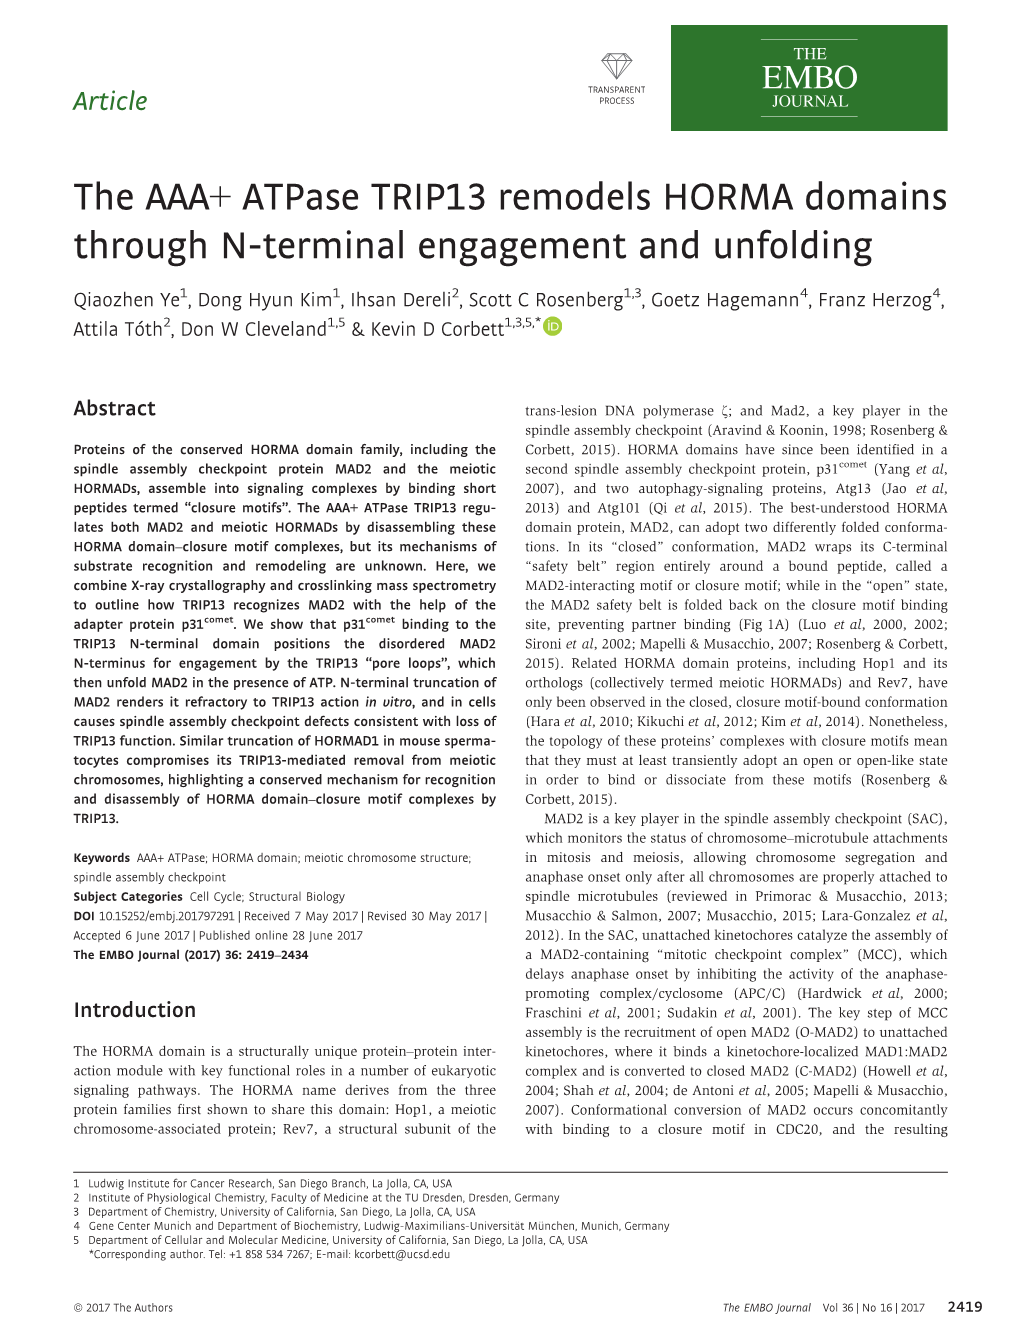 The AAA&#X002b; Atpase TRIP13 Remodels HORMA Domains Through